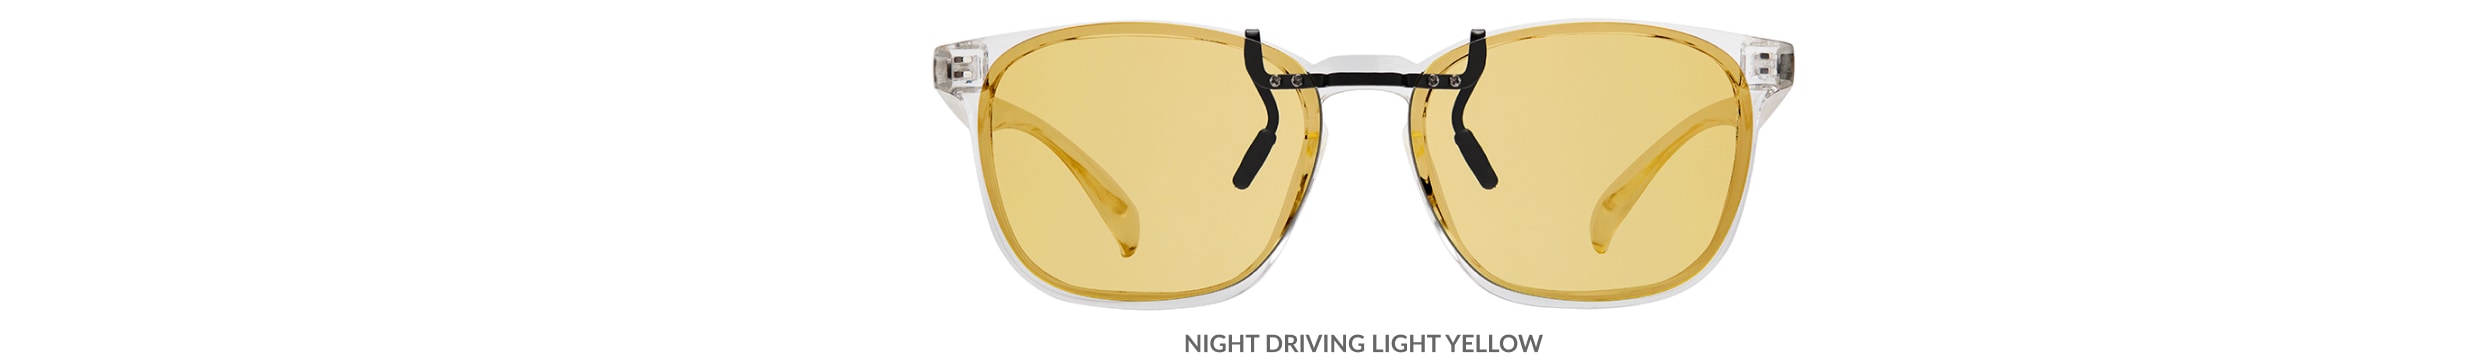 Custom clip-ons. Our polarized custom clip-ons reduce glare and are available for almost any frame. Each clip-on is specially cut to fit the frame with prices starting at just $3.95  (Compare to $50). Zenni square glasses #2020123 in clear, shown with night driving light yellow custom clip-on.